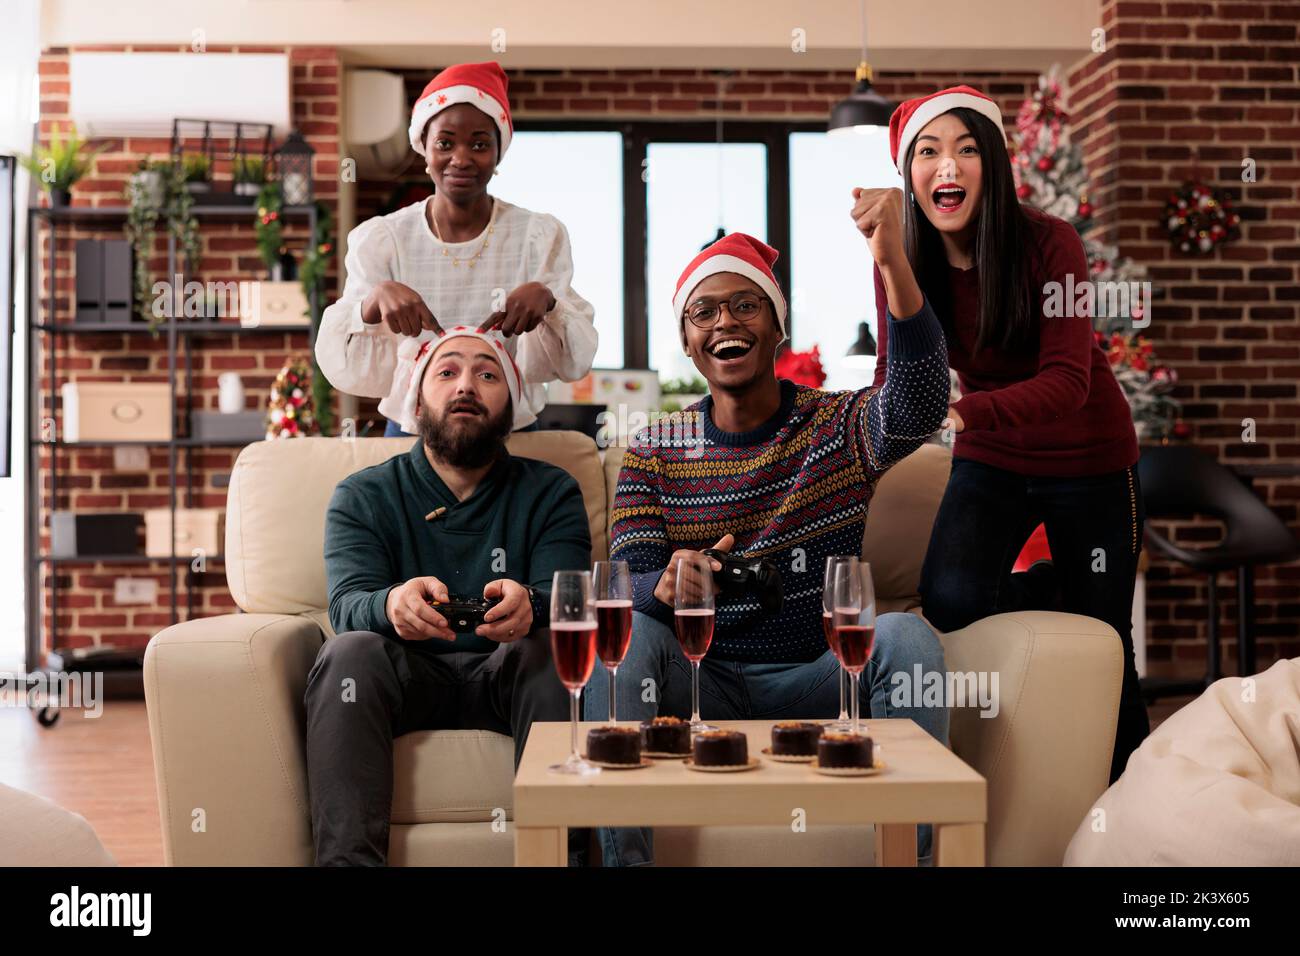 Diverse people playing video games at xmas party event in festive office with christmas tree and ornaments. Having fun with online competition on tv console, celebrating winter holiday. Stock Photo